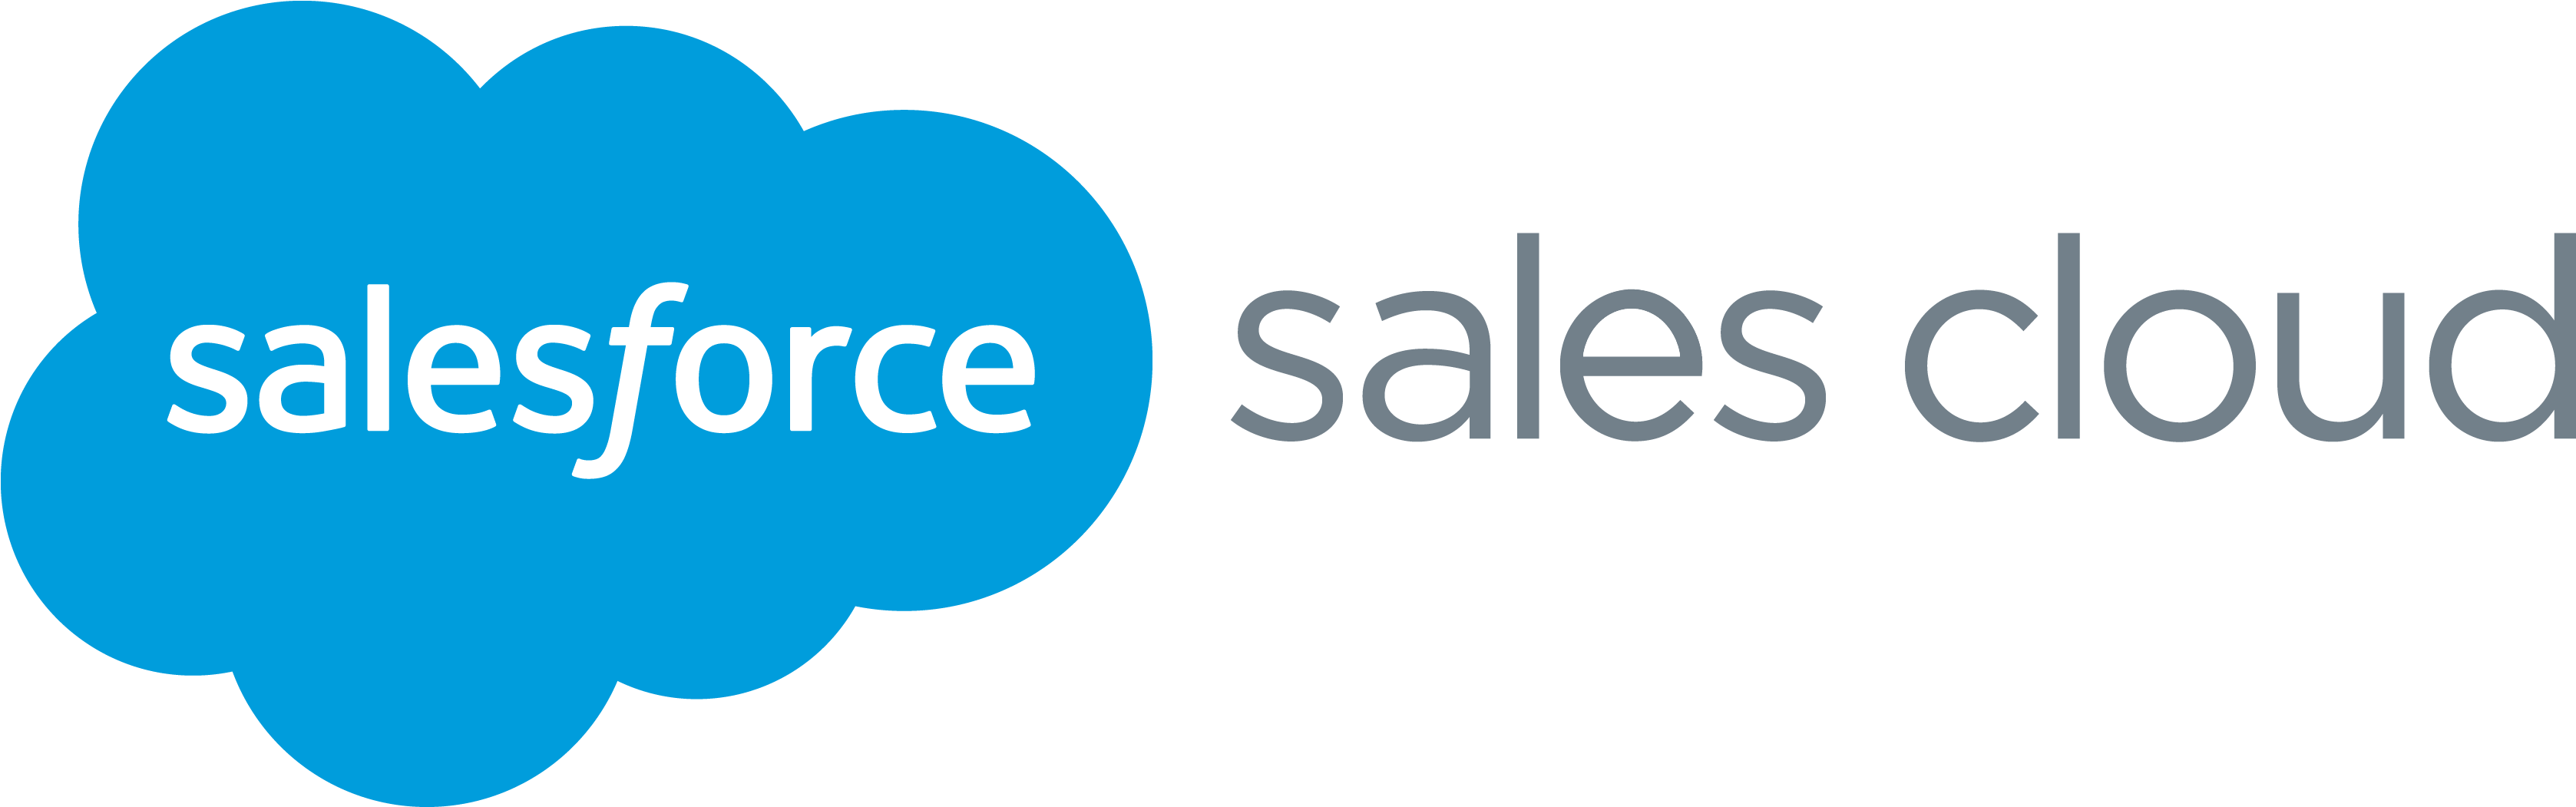 Compare Salesforce CRM with LucidTrac ERP/CRM